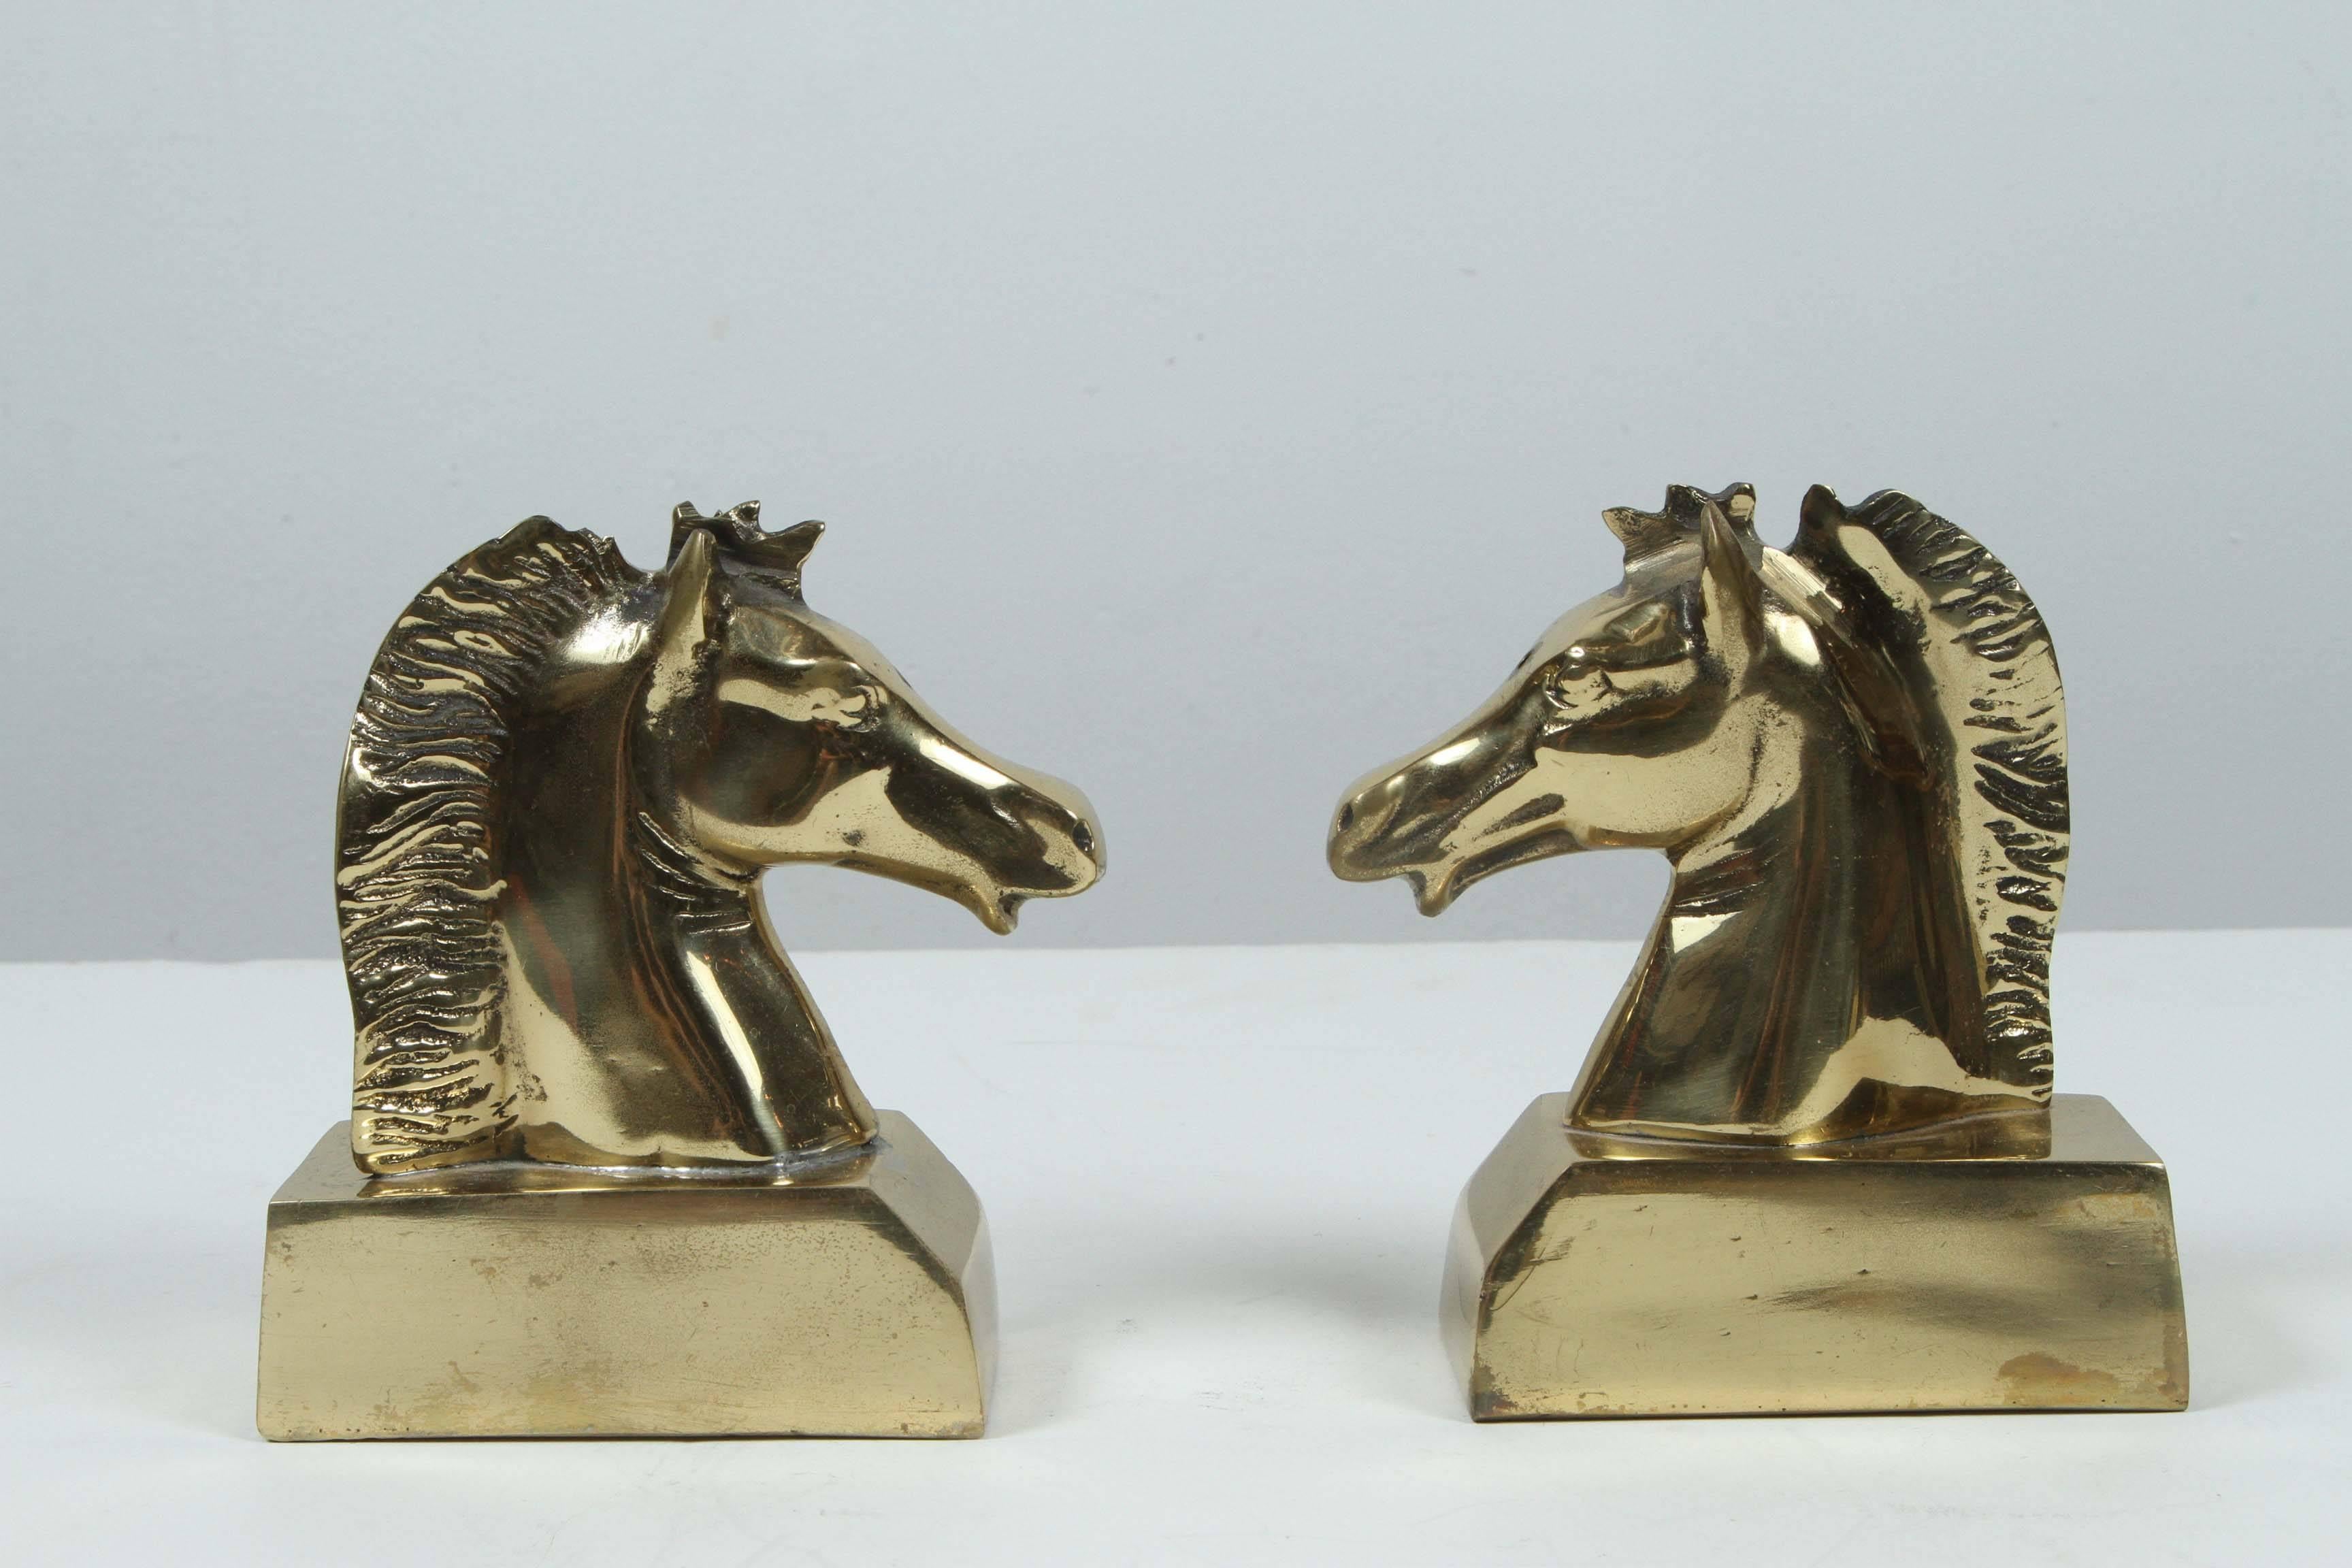 Pair of polished brass horse head bookends paperweights.
Great brass decorative art objects.
Will make a great gift.